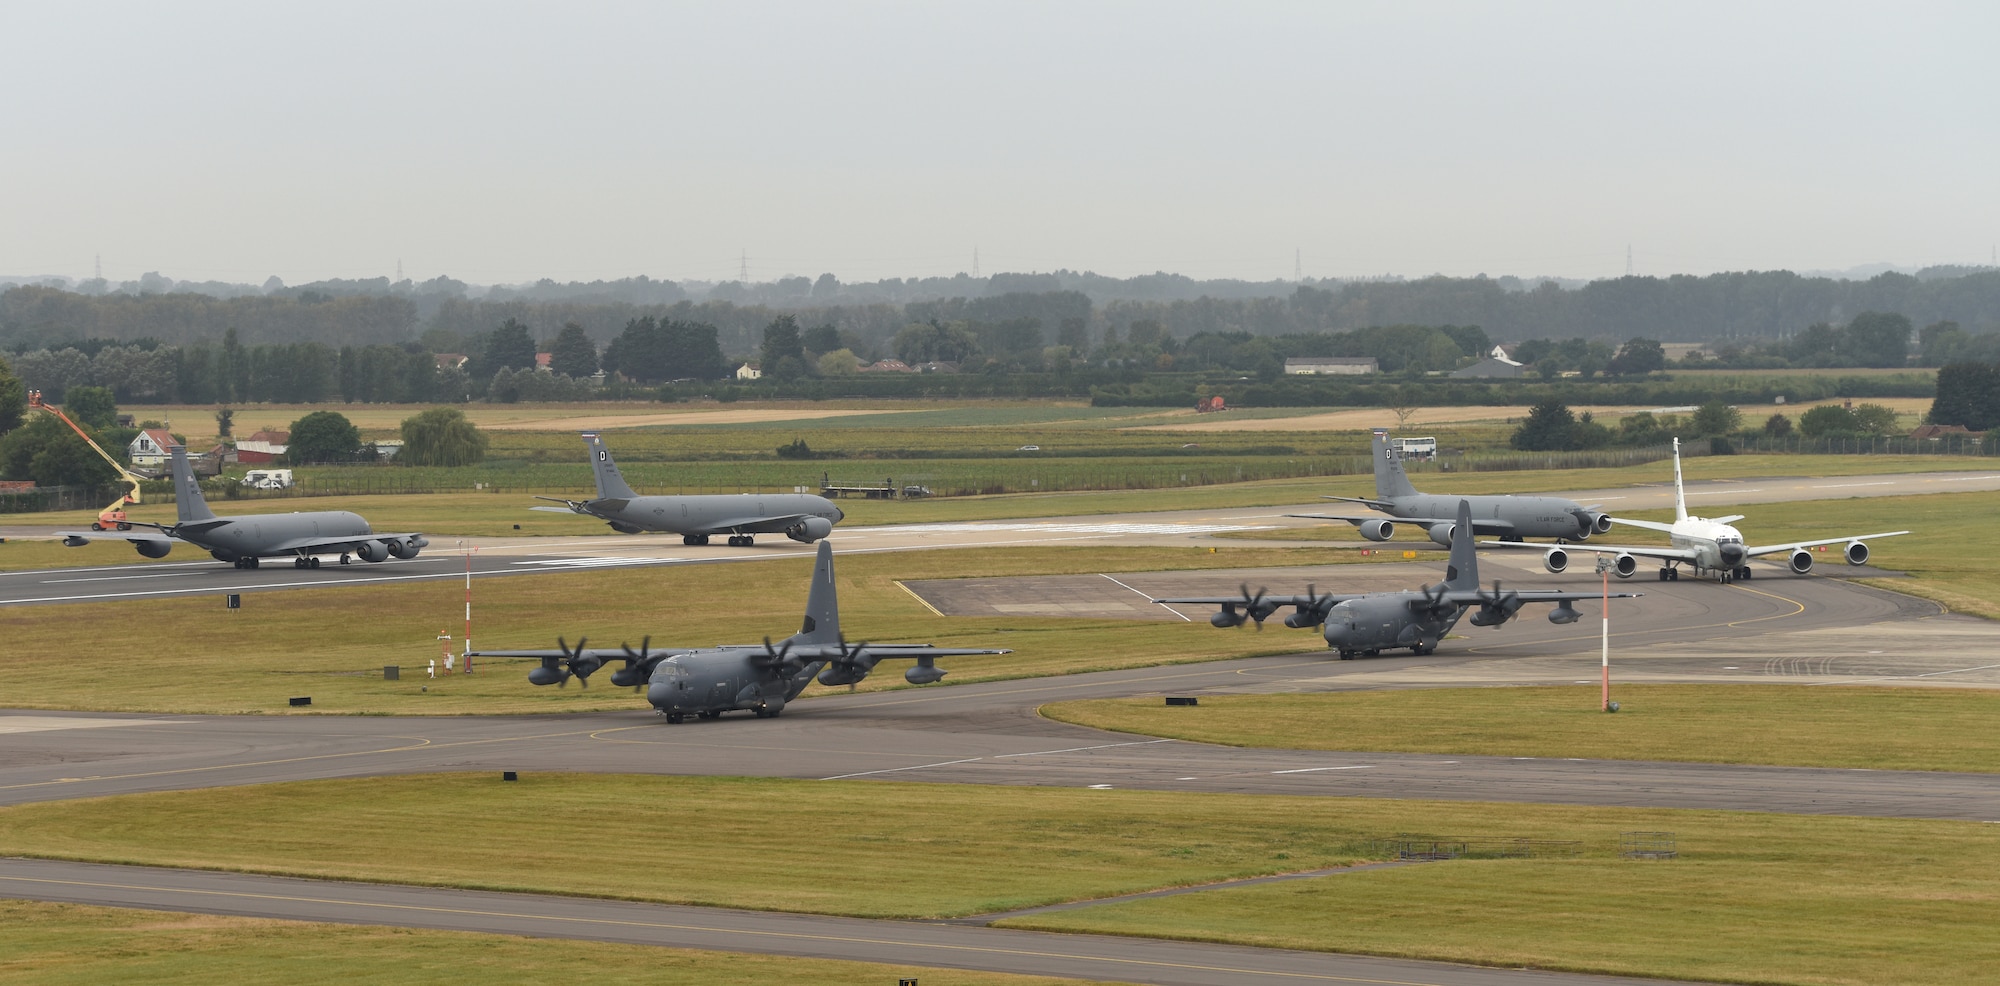 U.S. Air Force MC-130J Commando II, RC-135 Rivet Joint and KC-135 Stratotanker aircraft taxi along the flightline as they prepare to take off after an “elephant walk” at Royal Air Force Mildenhall, England, Sept. 13, 2021. An elephant walk is a term used by the U.S. Air Force when multiple aircraft taxi together before takeoff. (U.S. Air Force photo by Karen Abeyasekere)